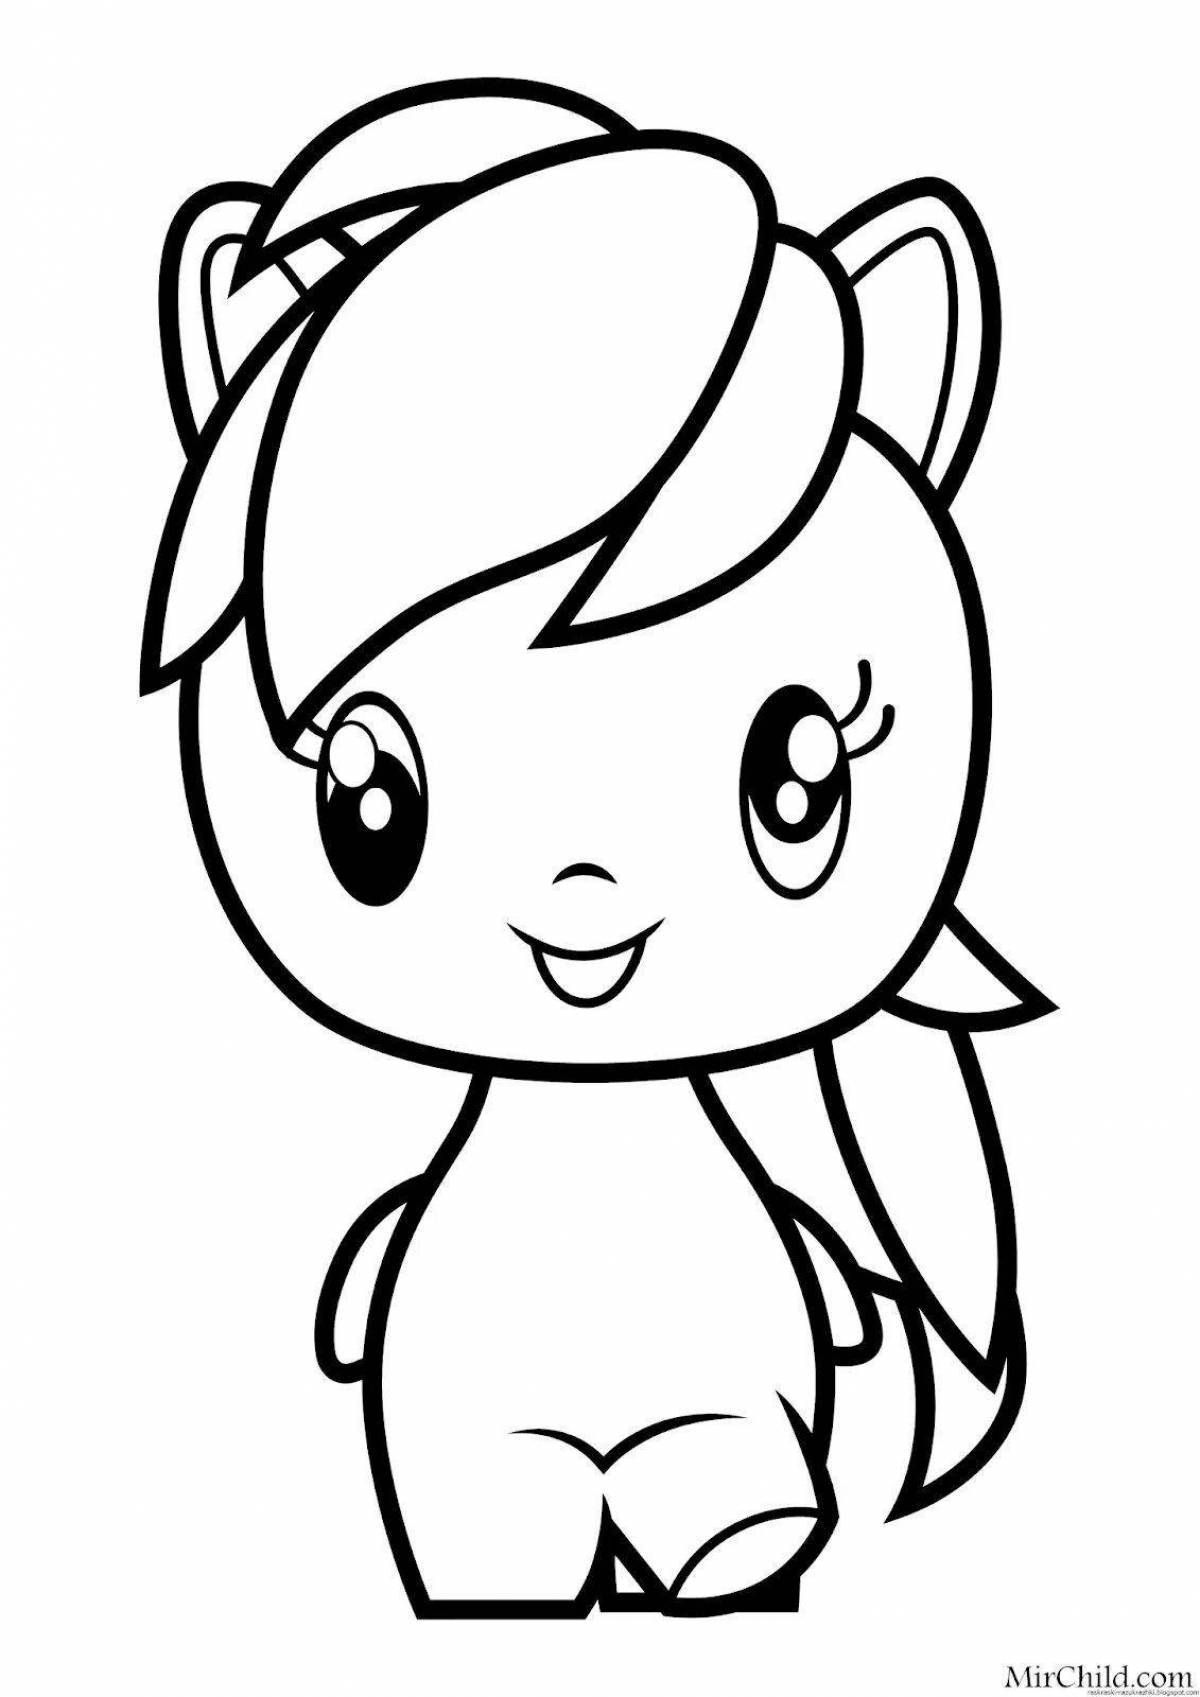 Amazing coloring pages for girls, small